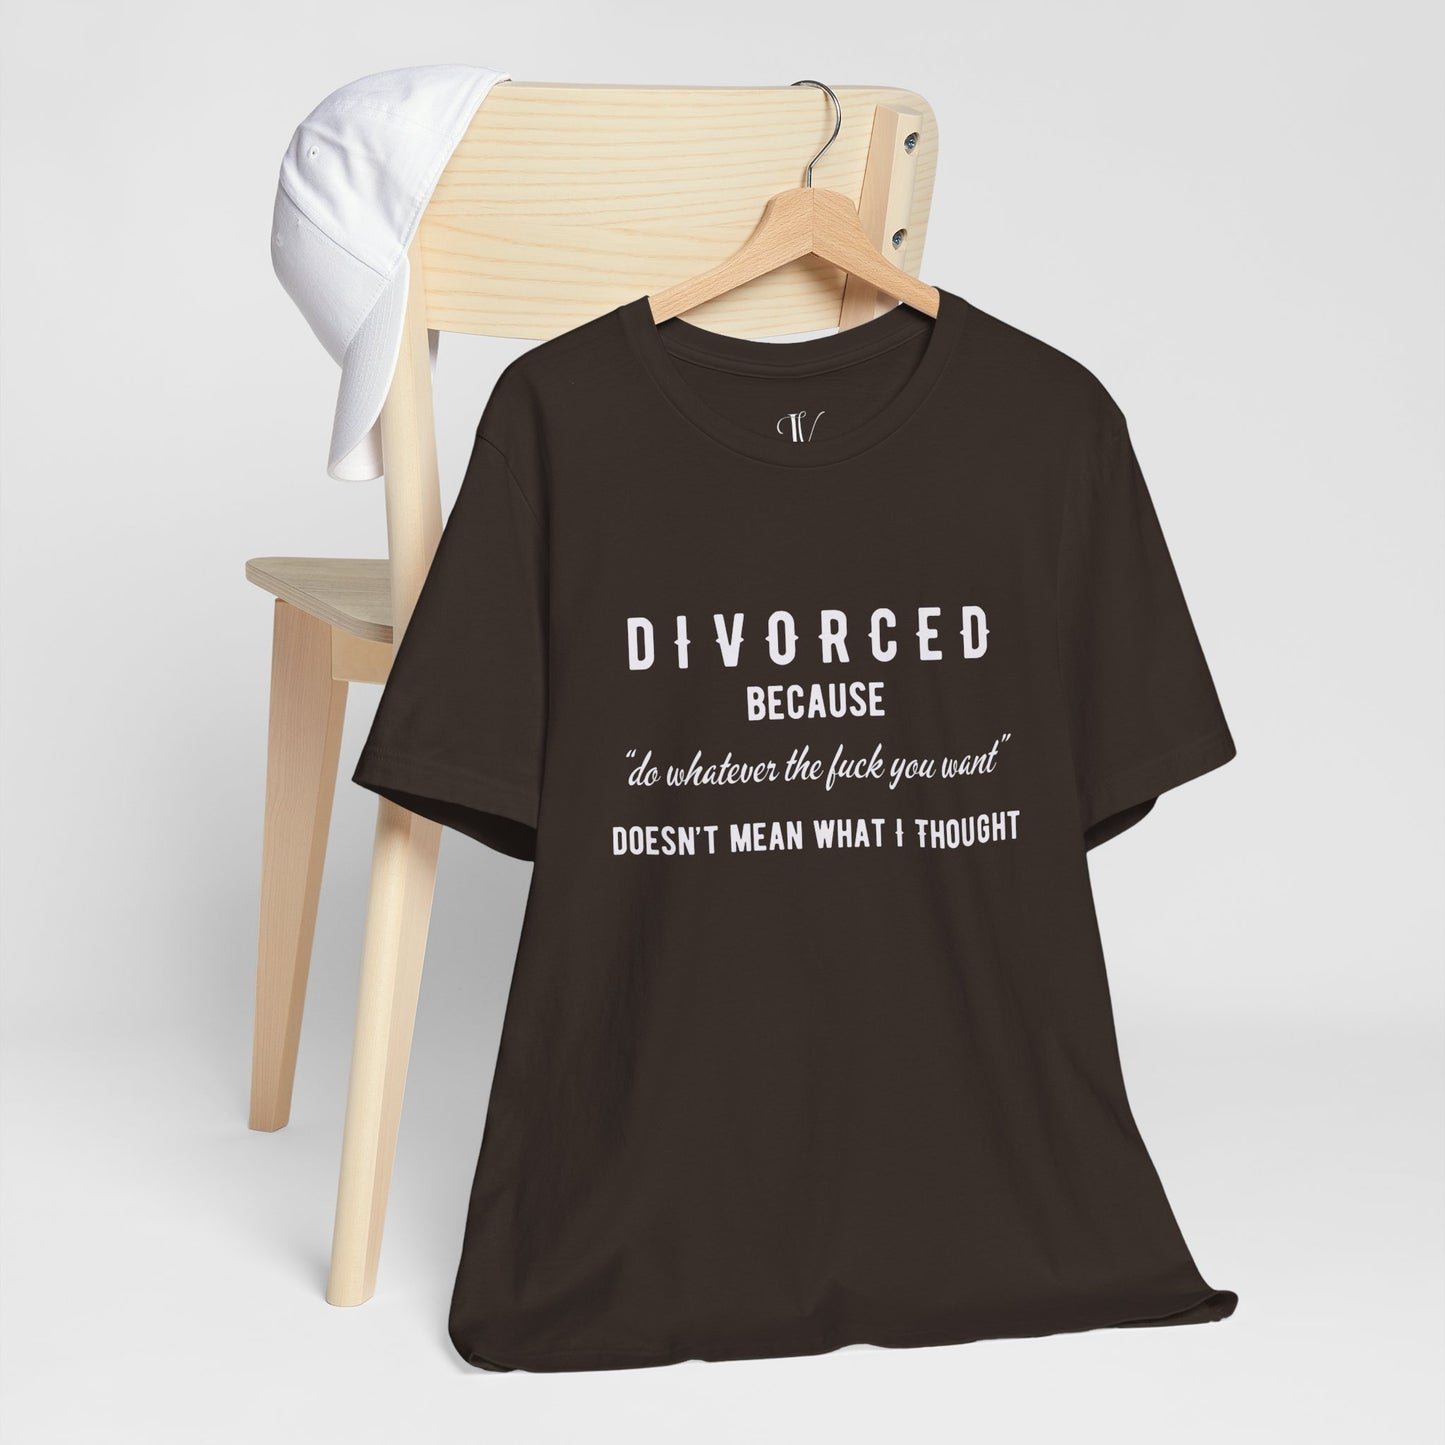 Divorced Shirt - Funny Divorce Party Gift for Ex-Husband or Ex-Wife T-Shirt Brown XS 